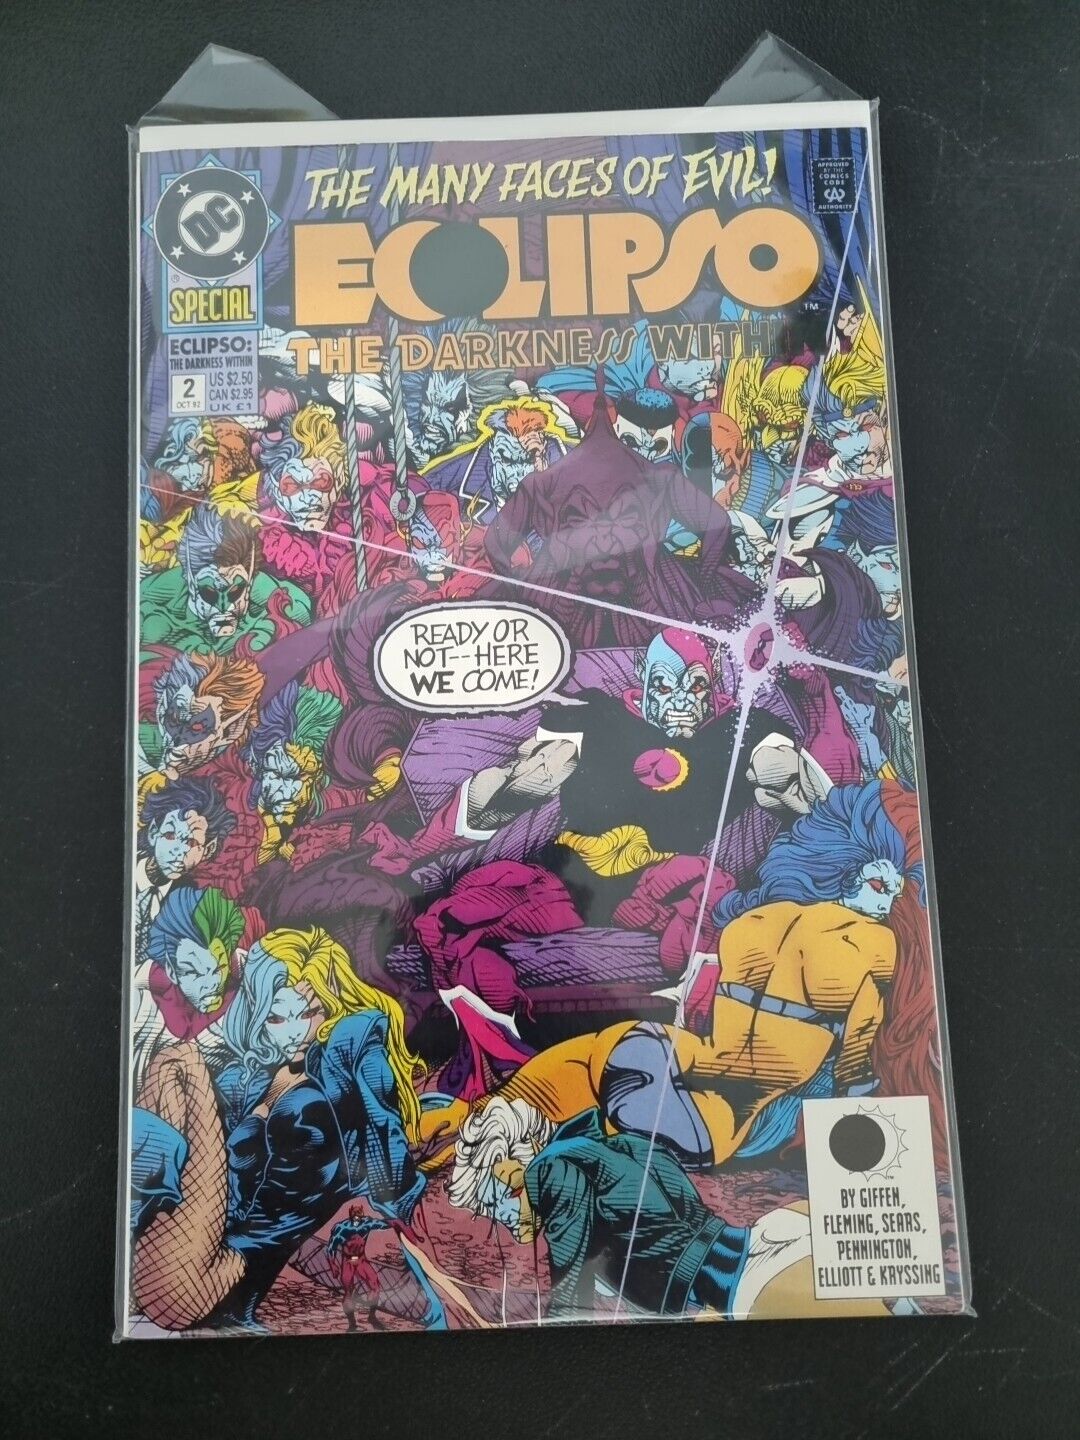 Eclipso: The Darkness Within #2 DC comics NM Full description below [j]